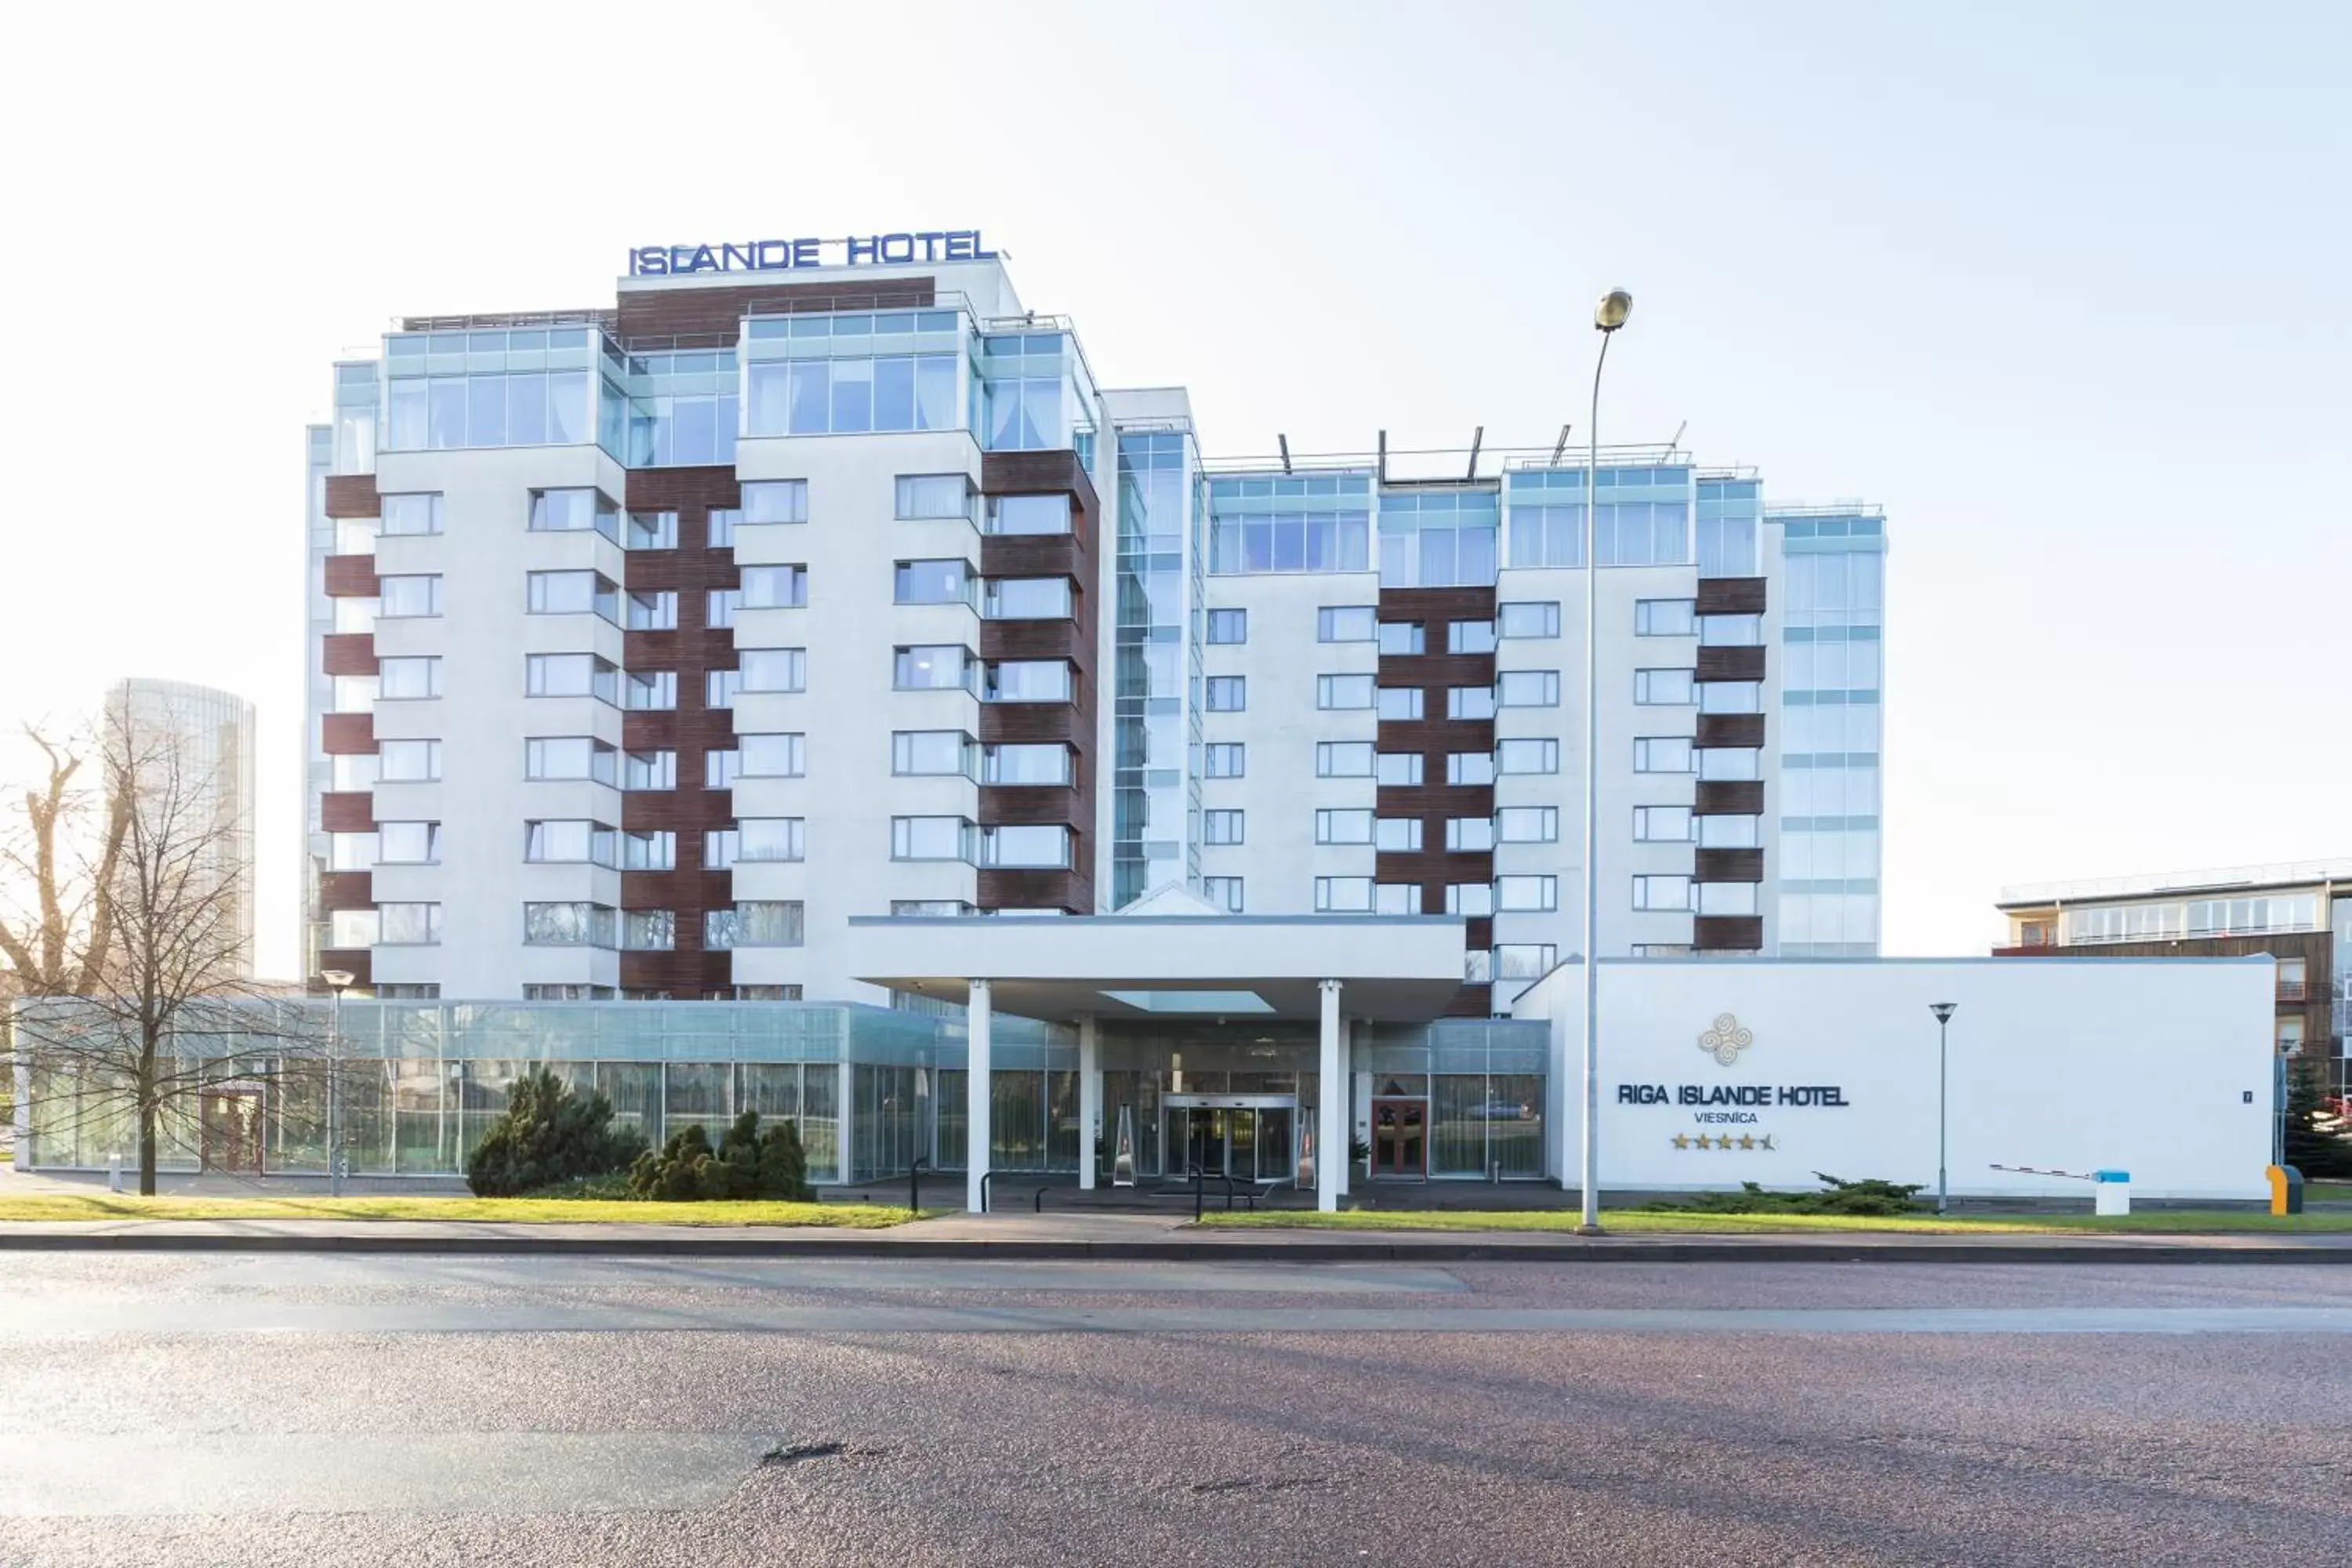 Property Building in Riga Islande Hotel with FREE Parking